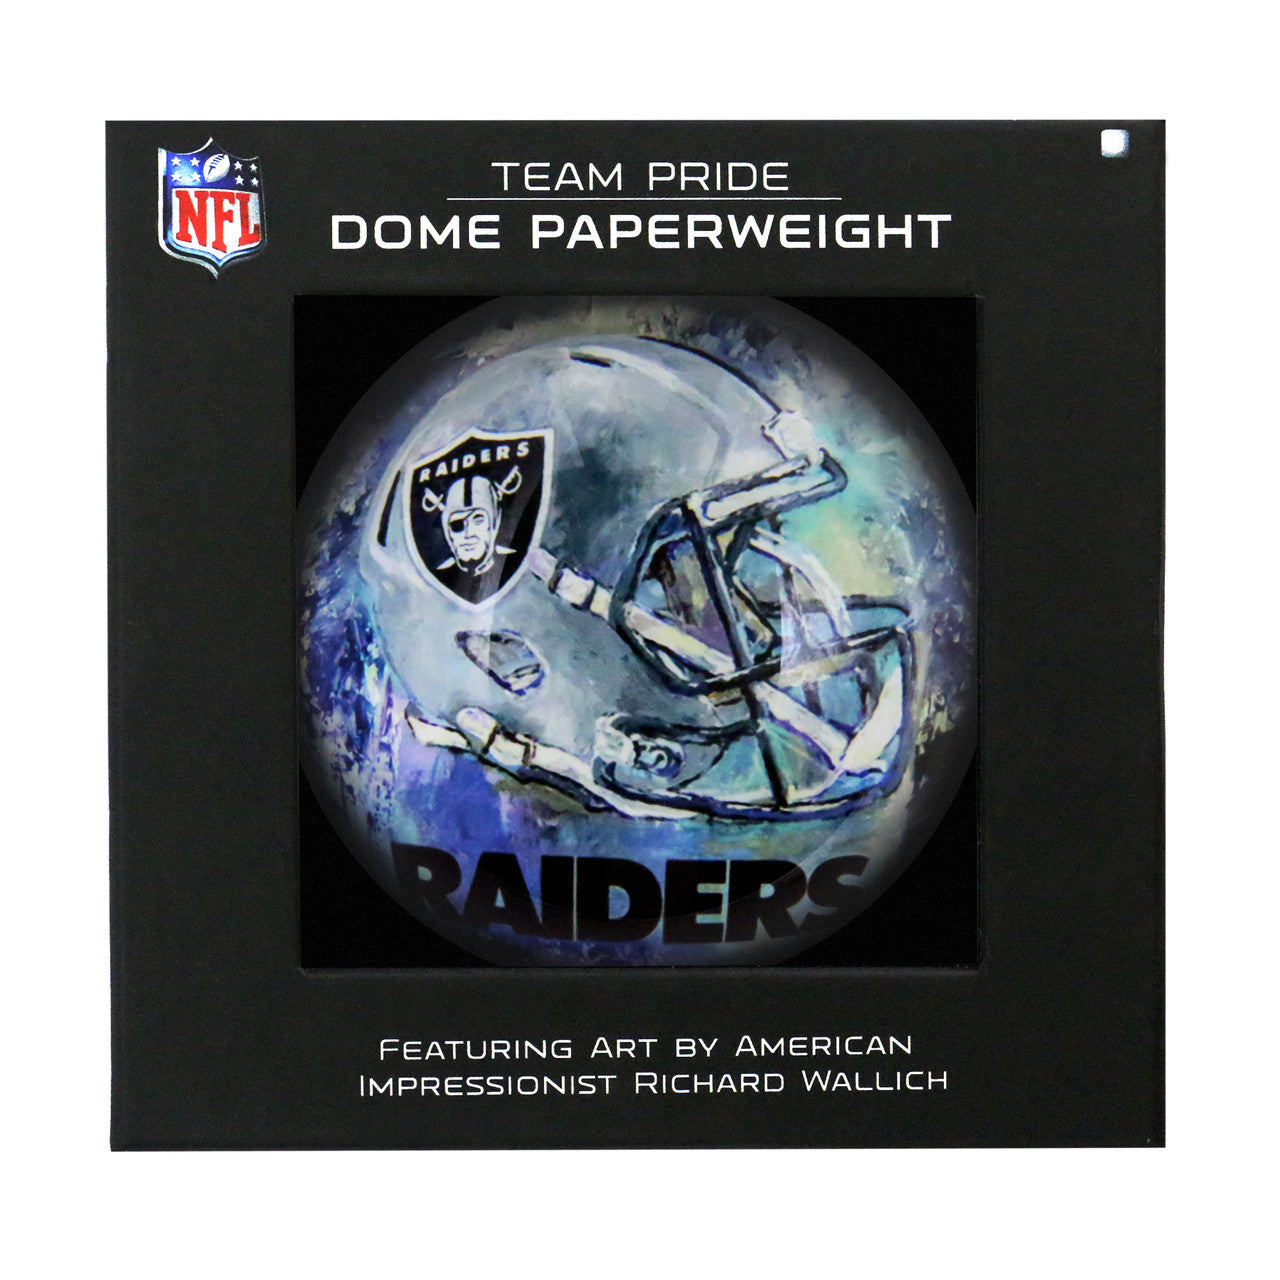 Las Vegas Raiders Domed Paperweight by Sporticulture